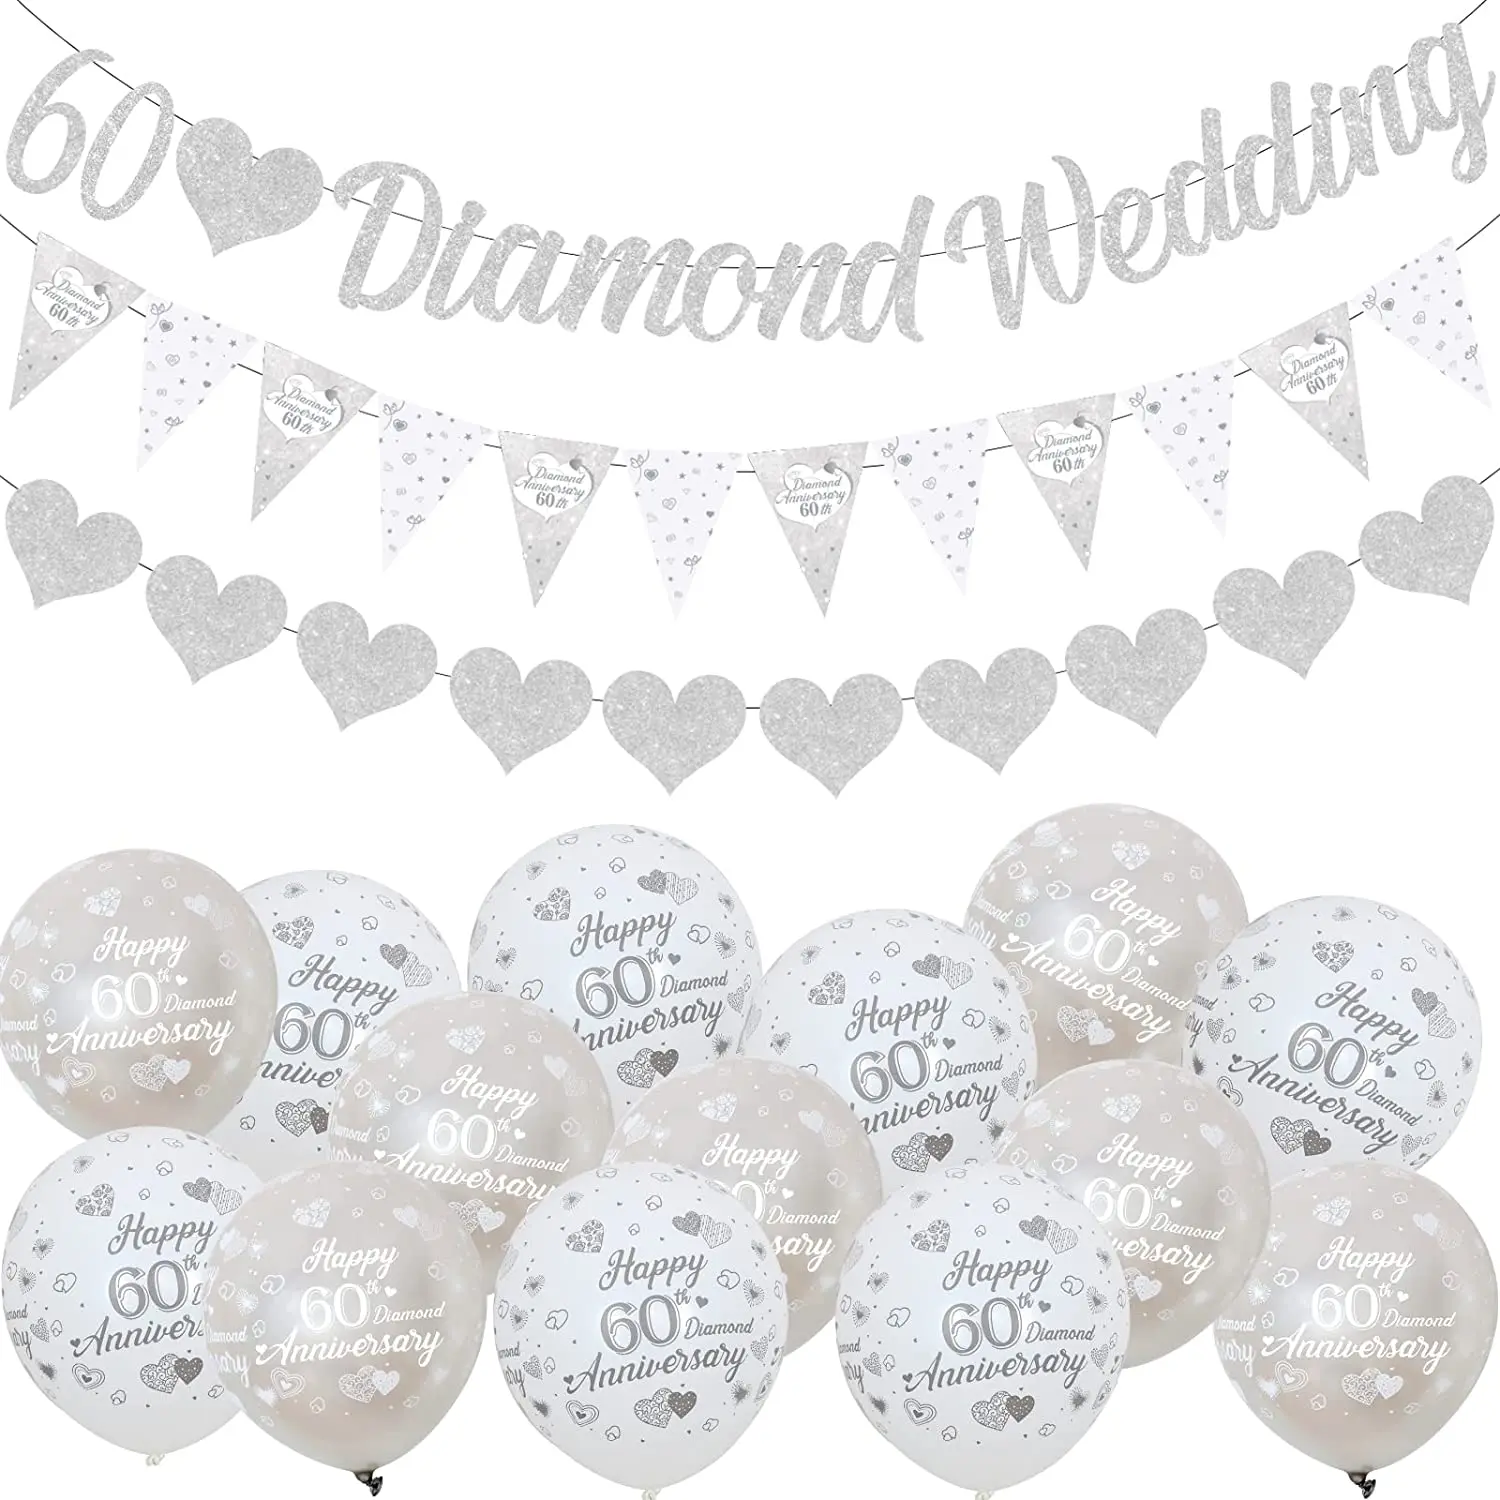 

Sursurprise 60th Wedding Anniversary Party Decorations 60th Diamond Wedding Glitter Banners Bunting Flag Balloons Party Supplies